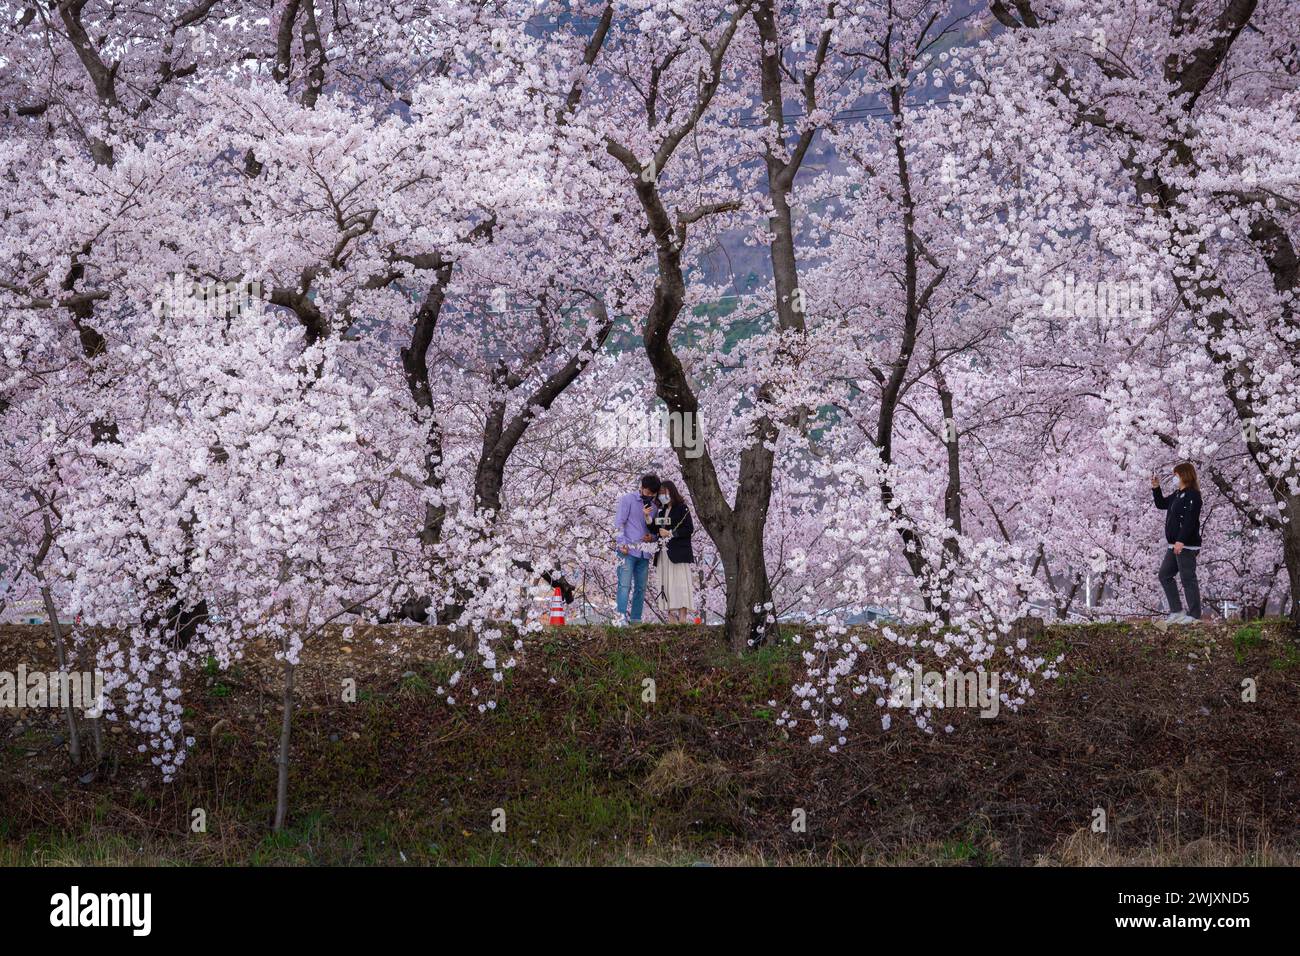 A Korean couple admires the cherry blossoms blooming at the Spring Festival in Gyeongju, South Korea. Stock Photo